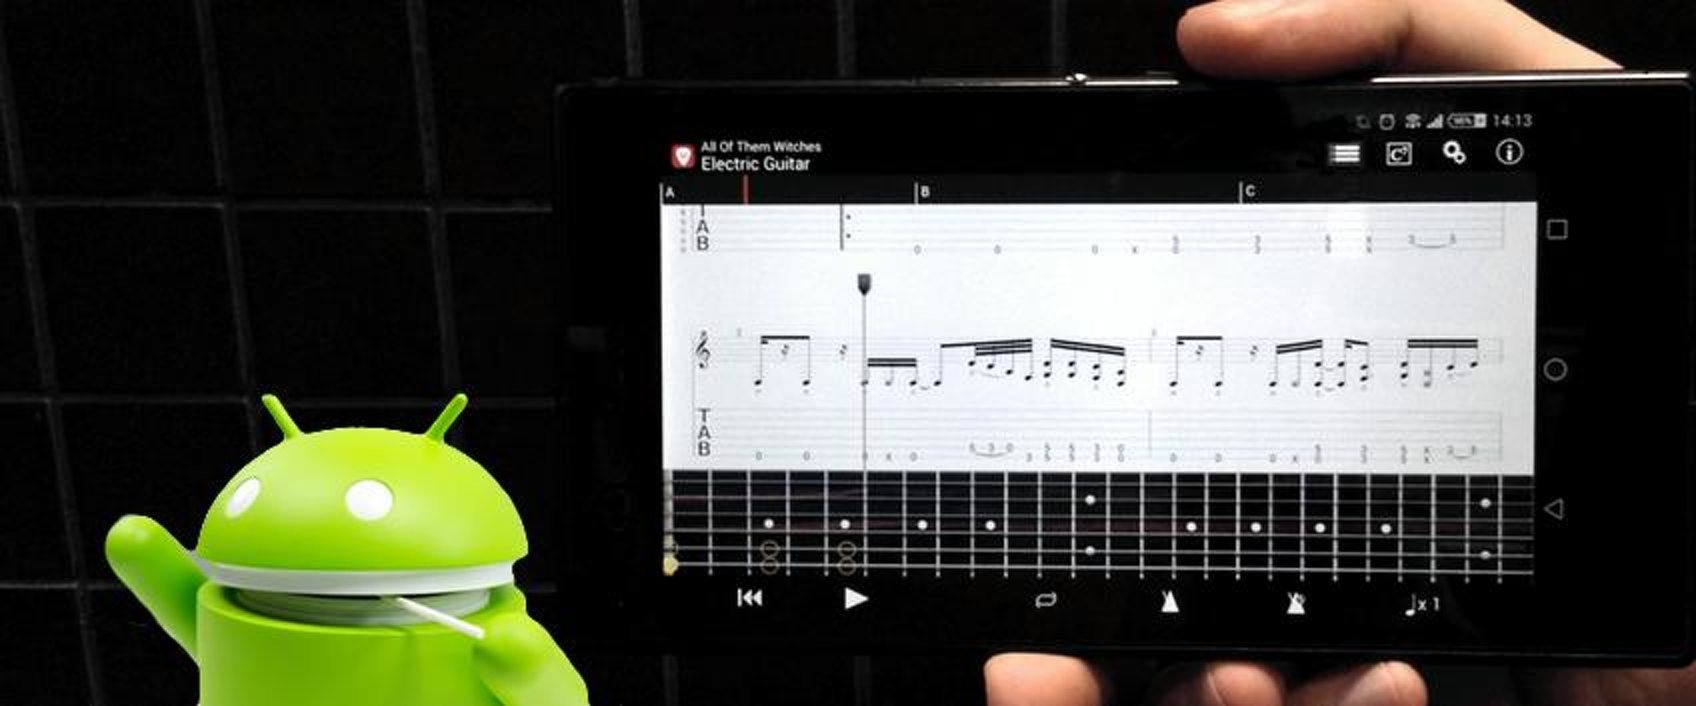 guitar pro android